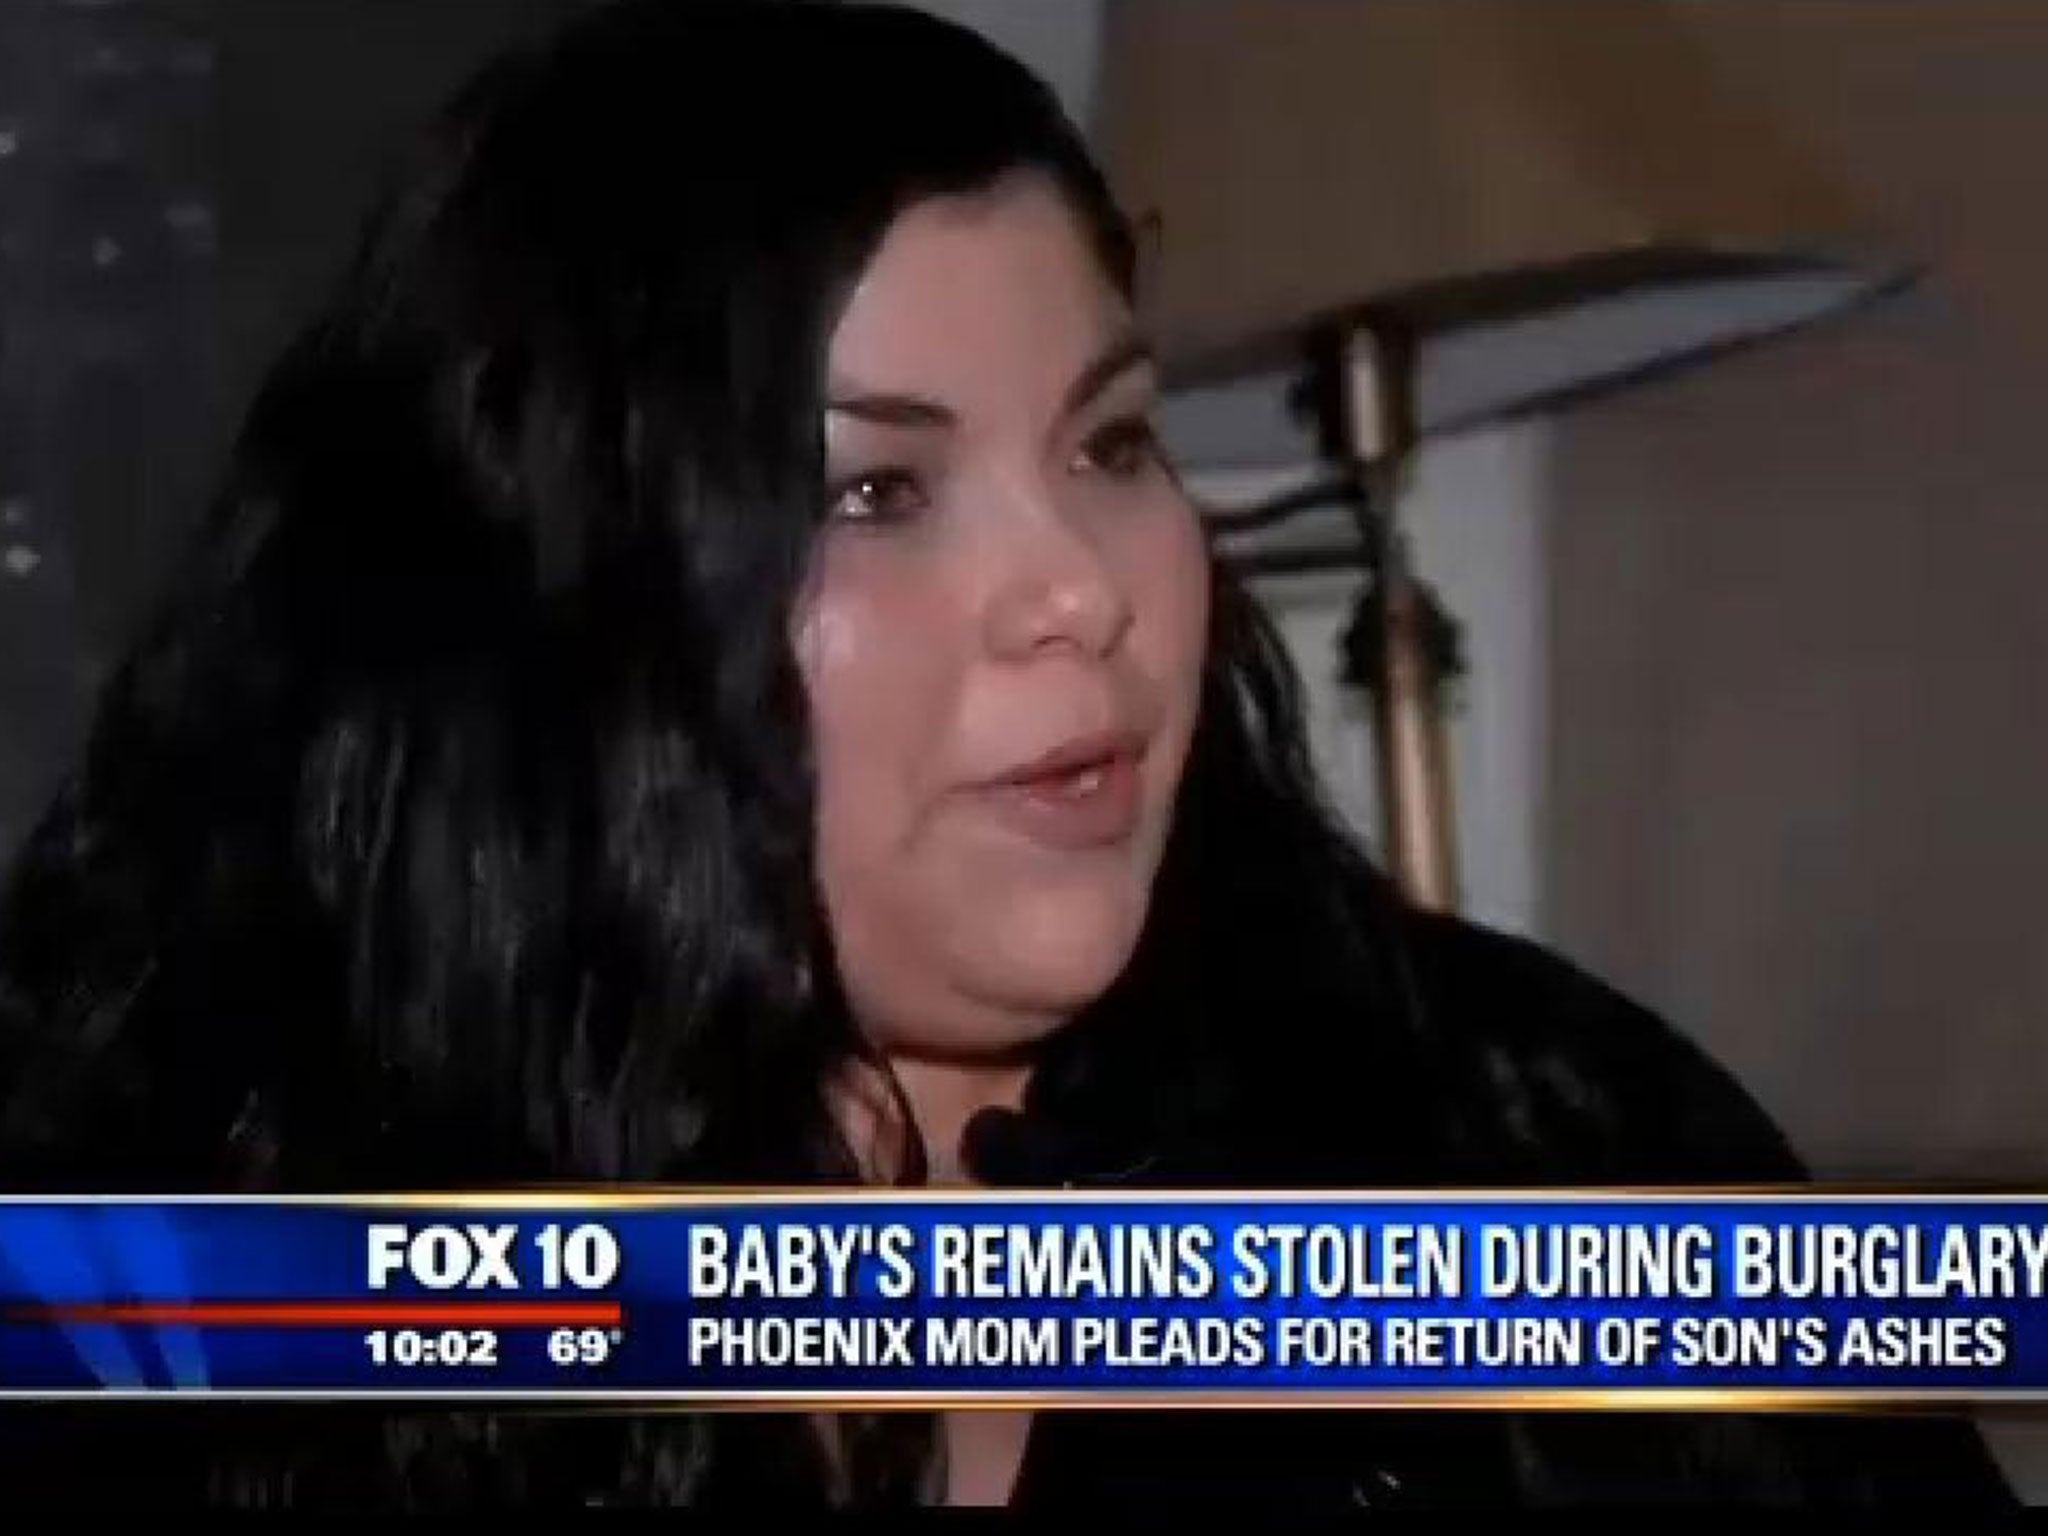 Alyssa Ruiz says thieves stole her baby' ashes - but left the urn behind.